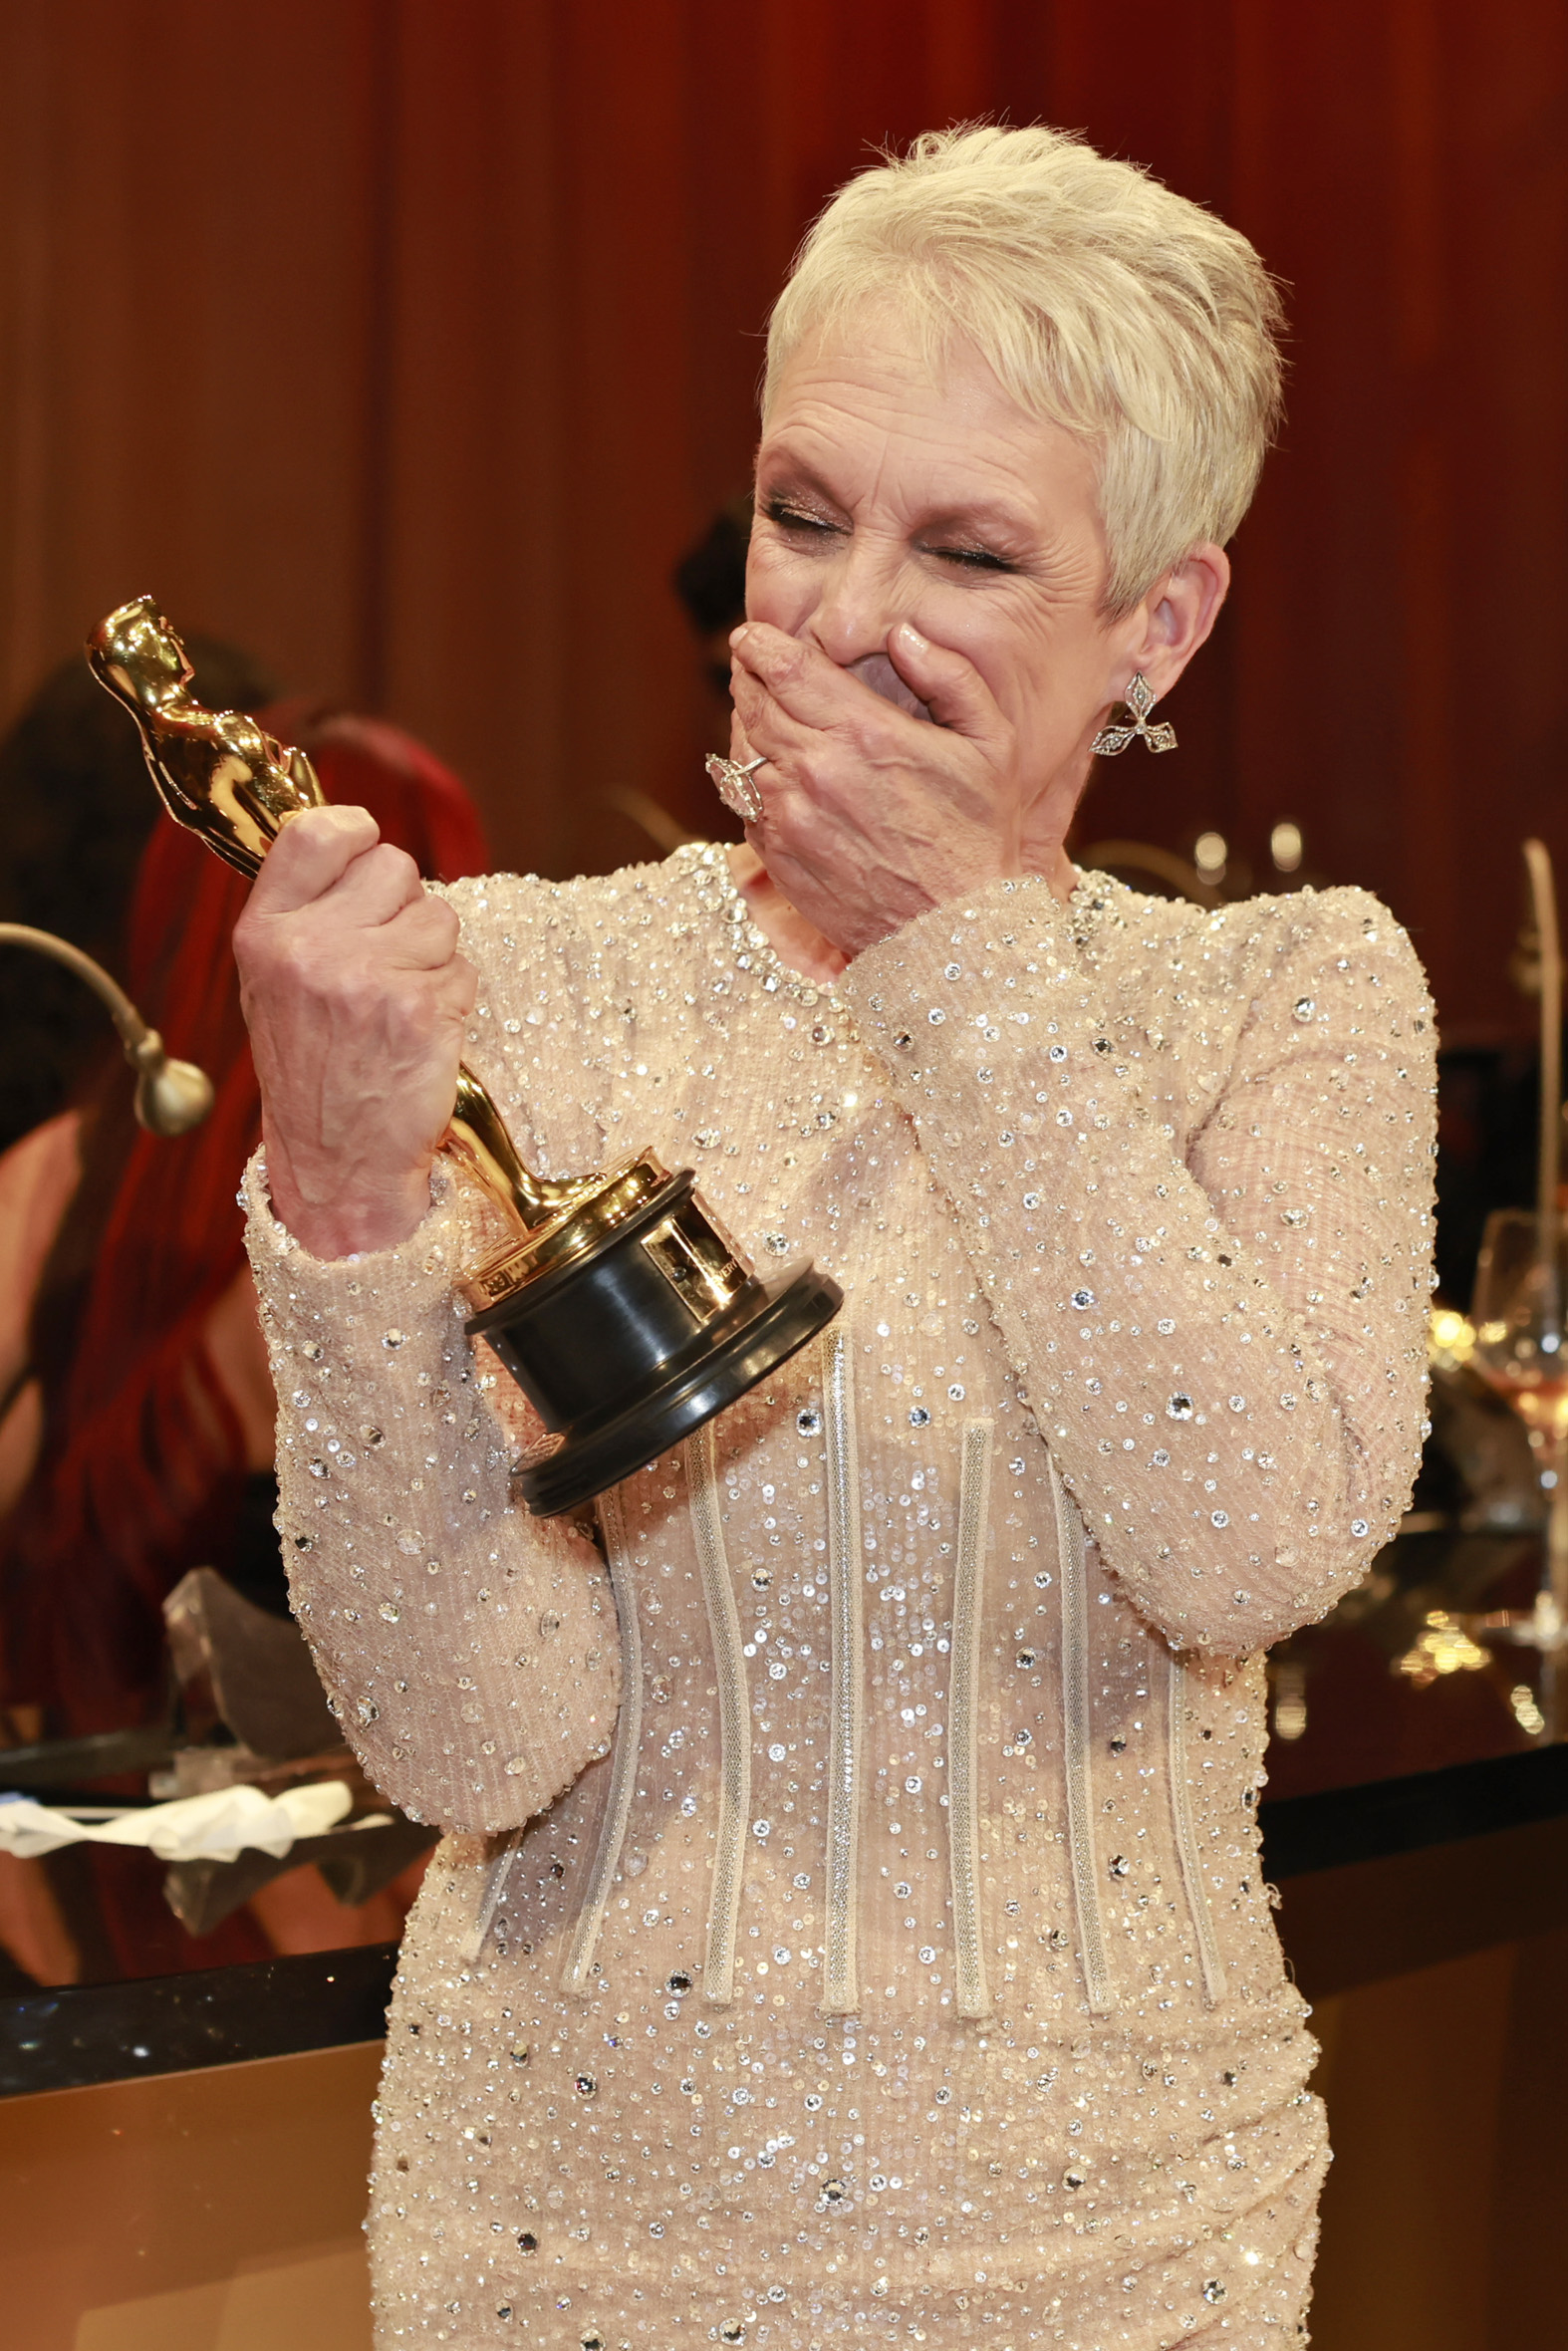 Jamie Lee Curtis Cried after Oscar Win Yet Was Told She Doesn't Deserve